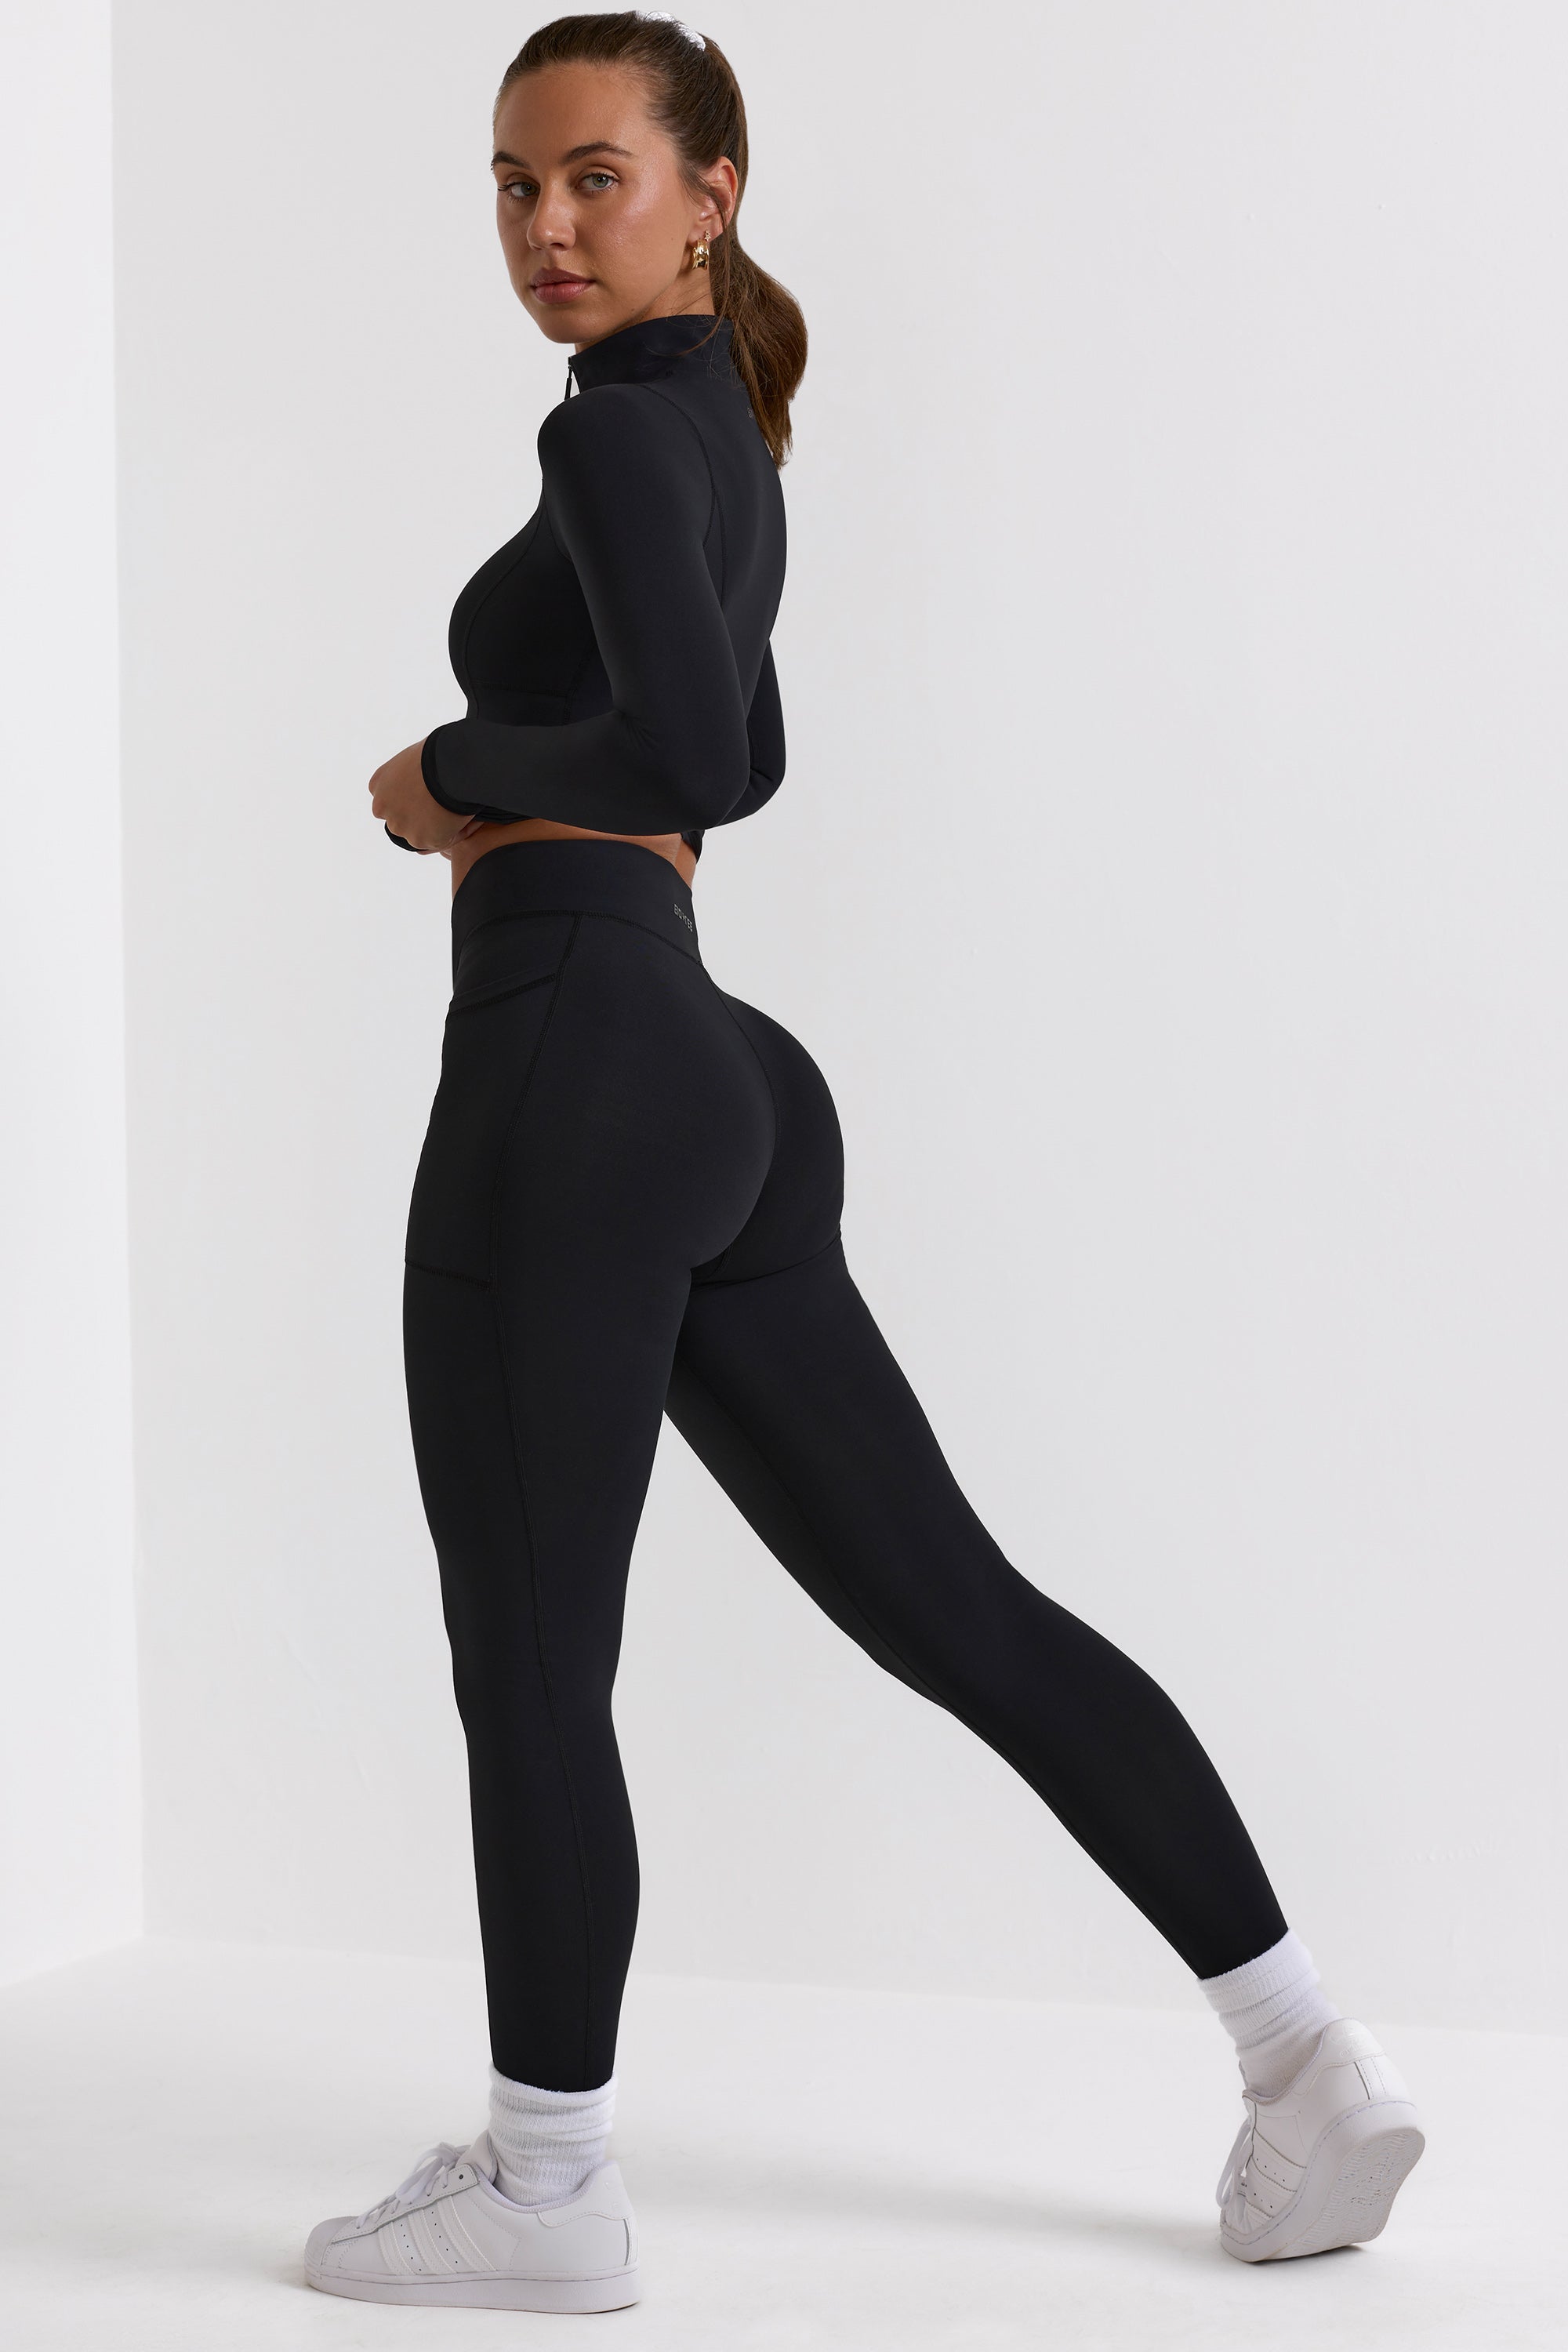 Buy Mountain Tan Brown High Leggings With Pockets Online - Life & Jam